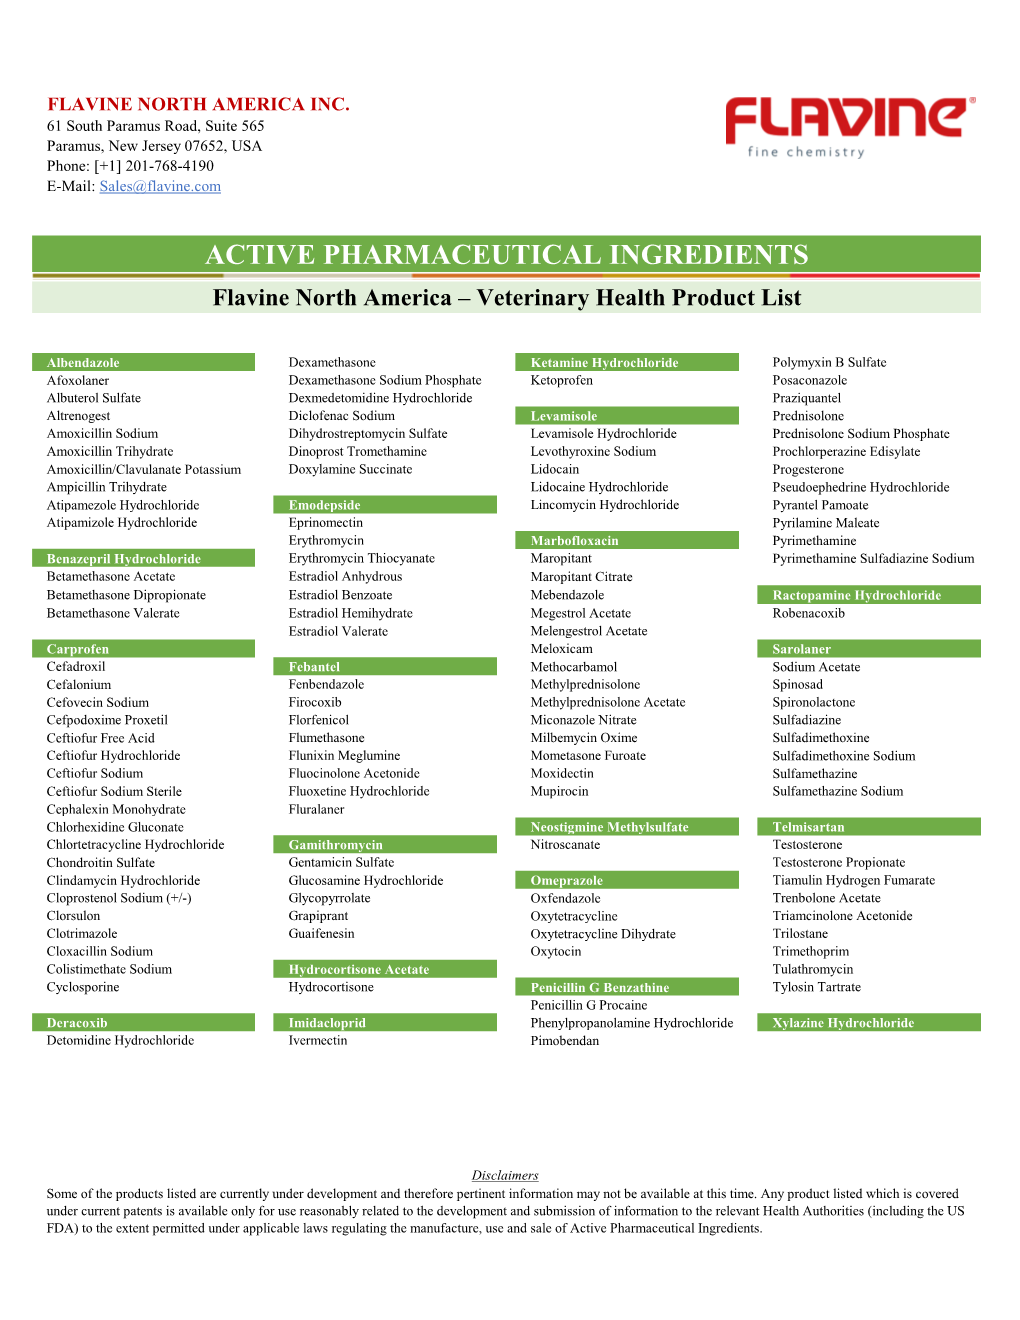 ACTIVE PHARMACEUTICAL INGREDIENTS Flavine North America – Veterinary Health Product List